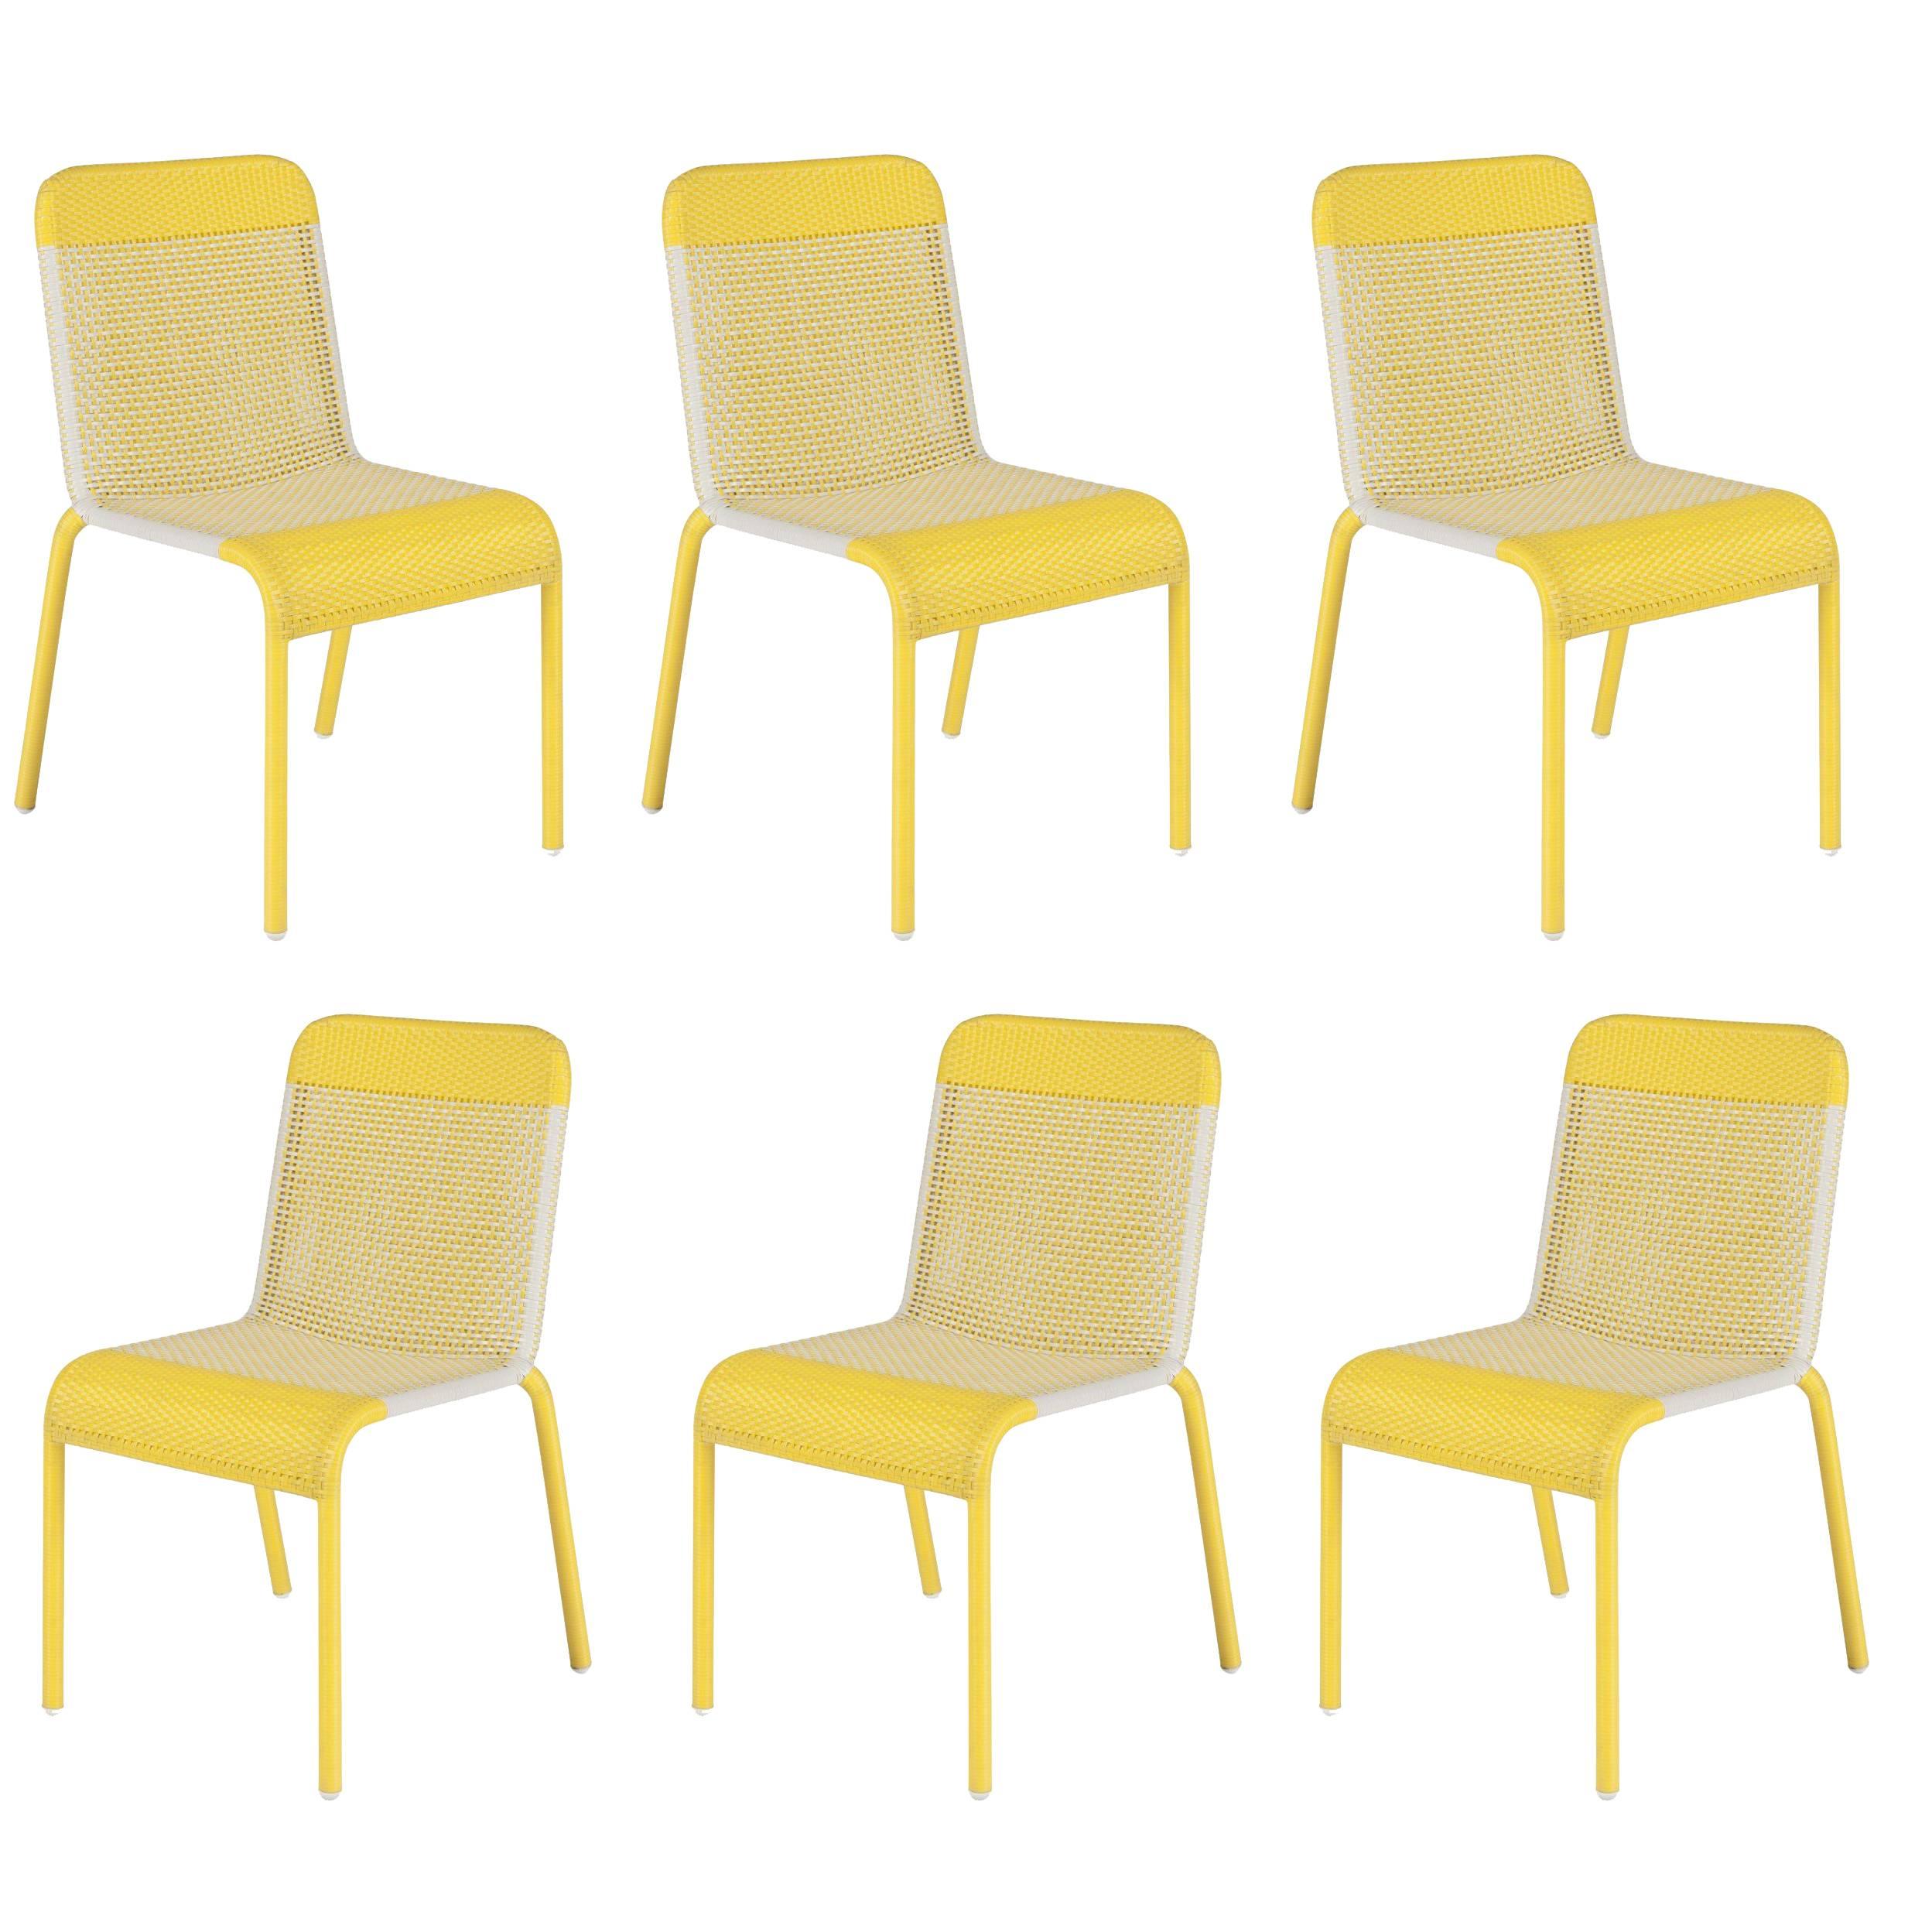 Set of Six Yellow Resin Stackable Chairs